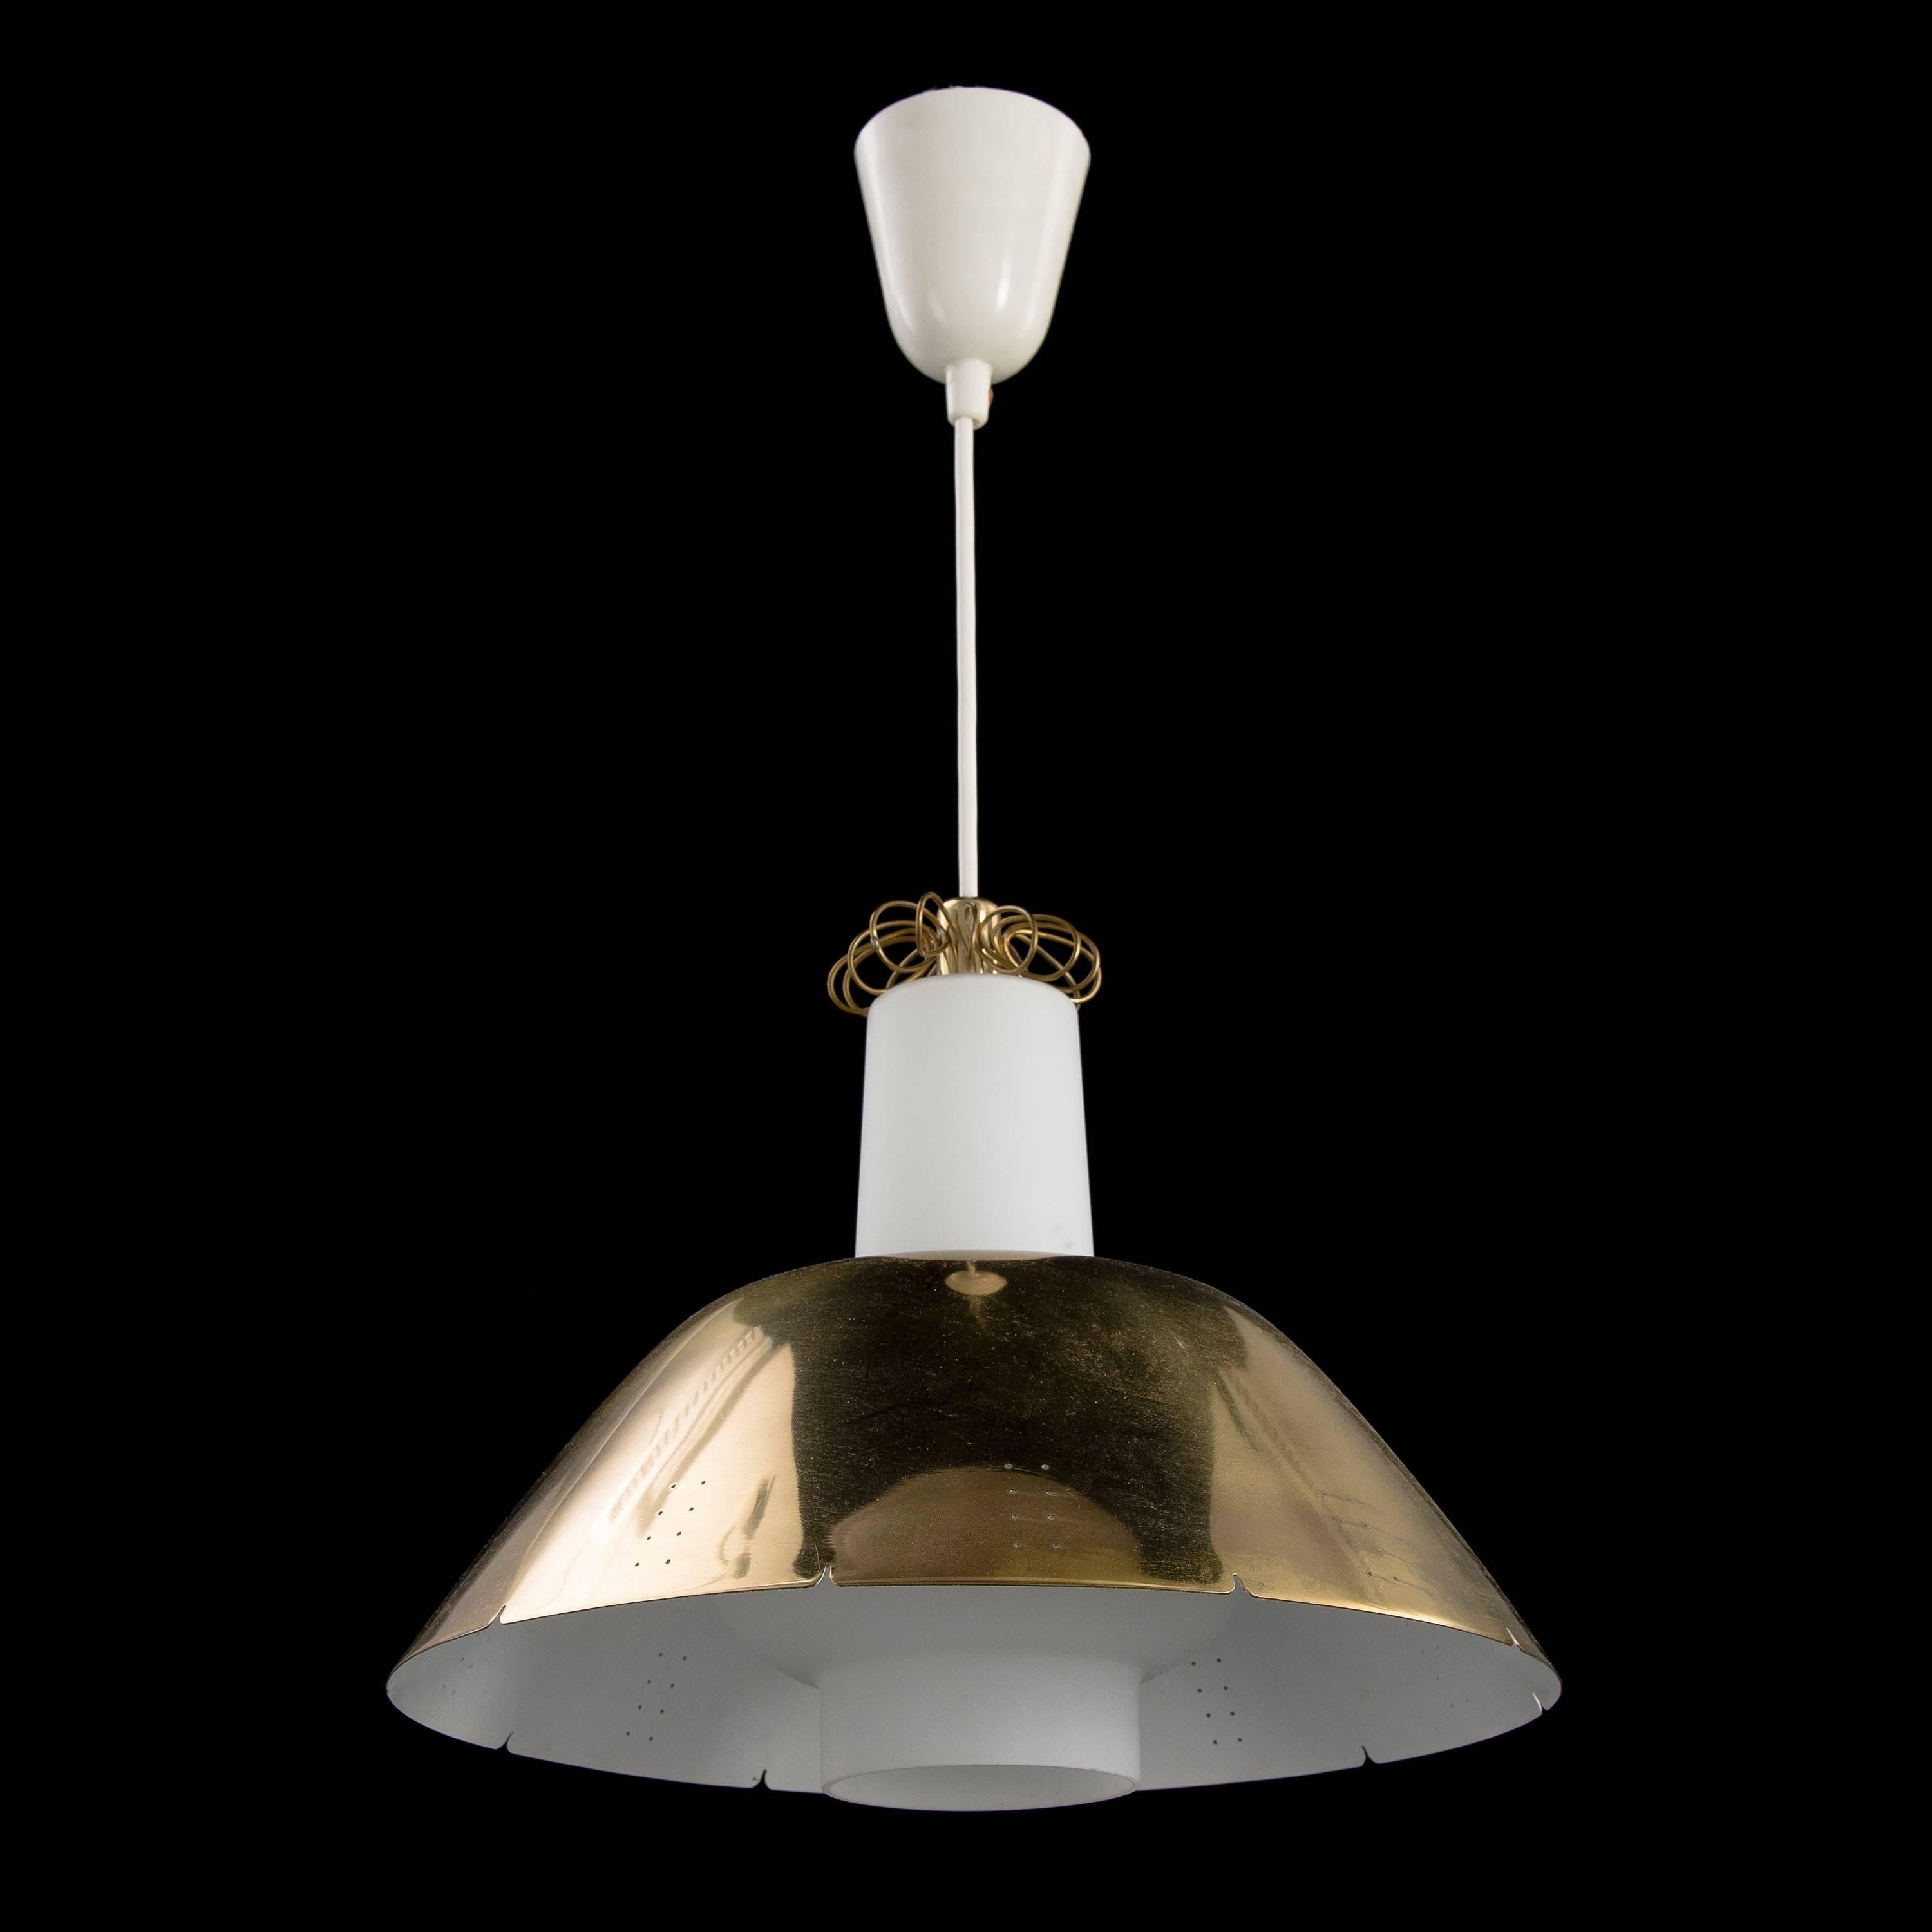 Brass and opal glass pendant by Finnish designer Paavo Tynell for Idman Oy.
Polished and perforated brass shade over frosted glass diffuser with bras detailing. Manufacturing period mid-1950s.
